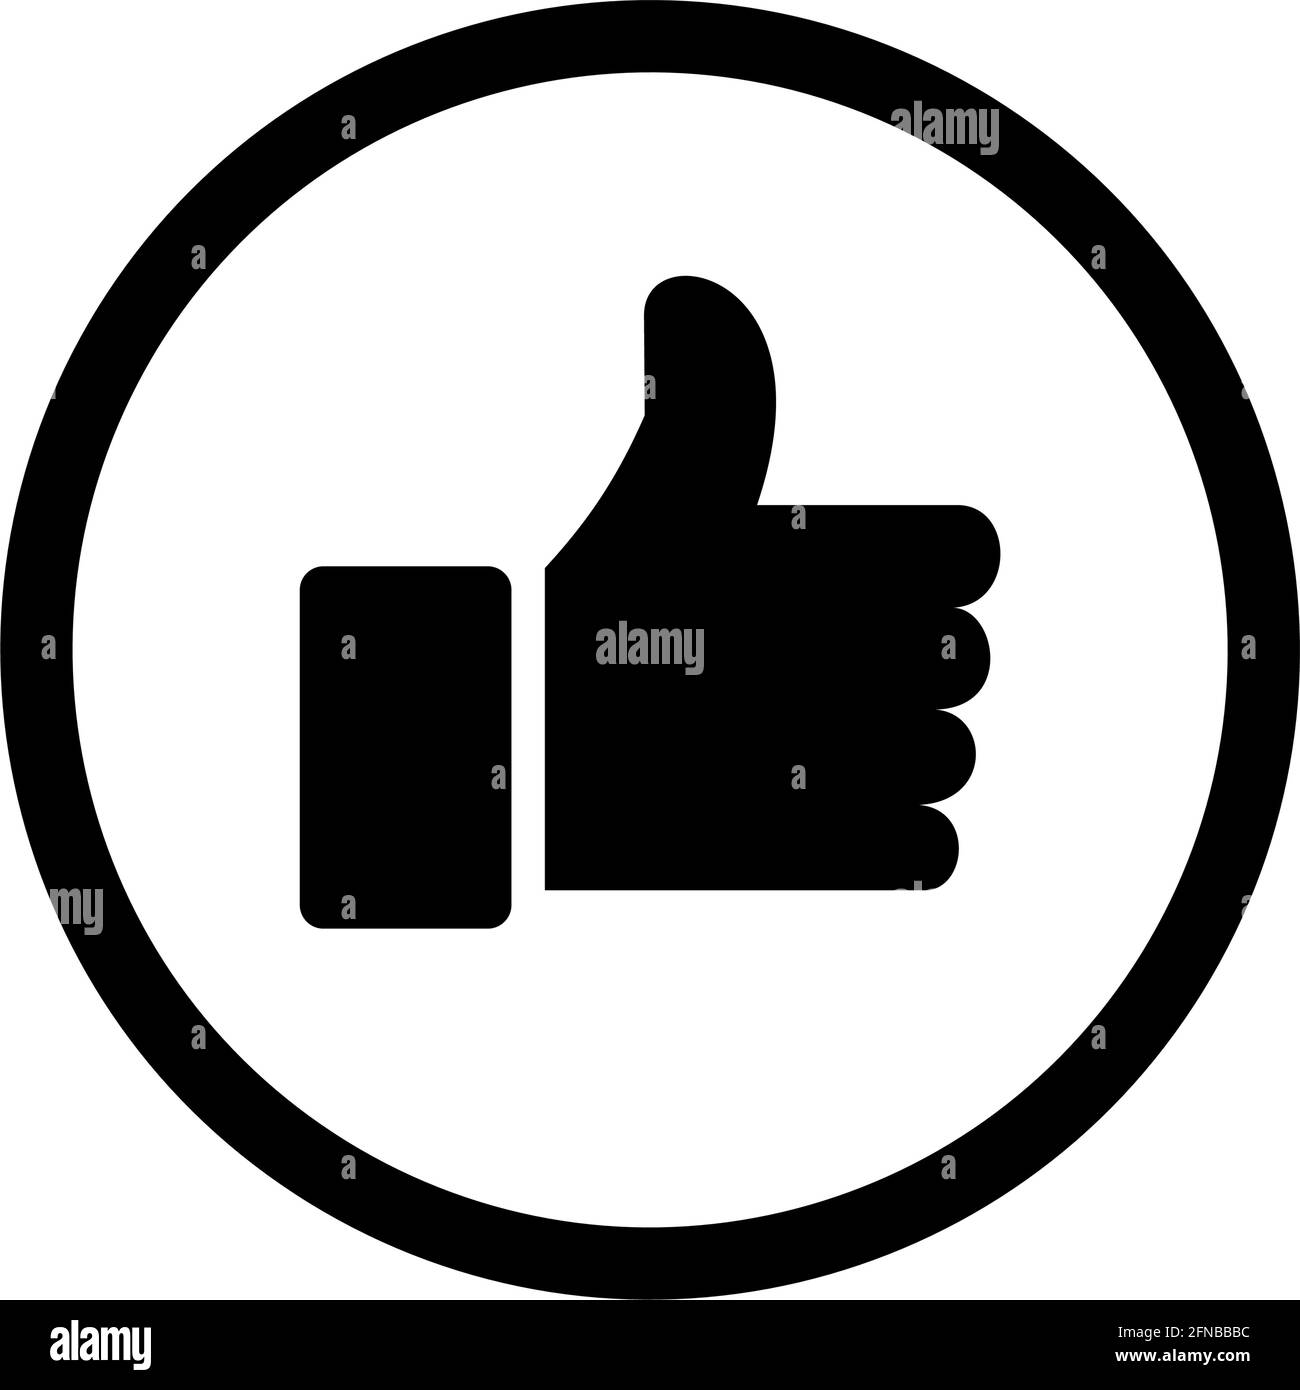 THUMB UP ICON, LIKE ICON, BLACK WITH CIRCULAR FRAME Stock Vector